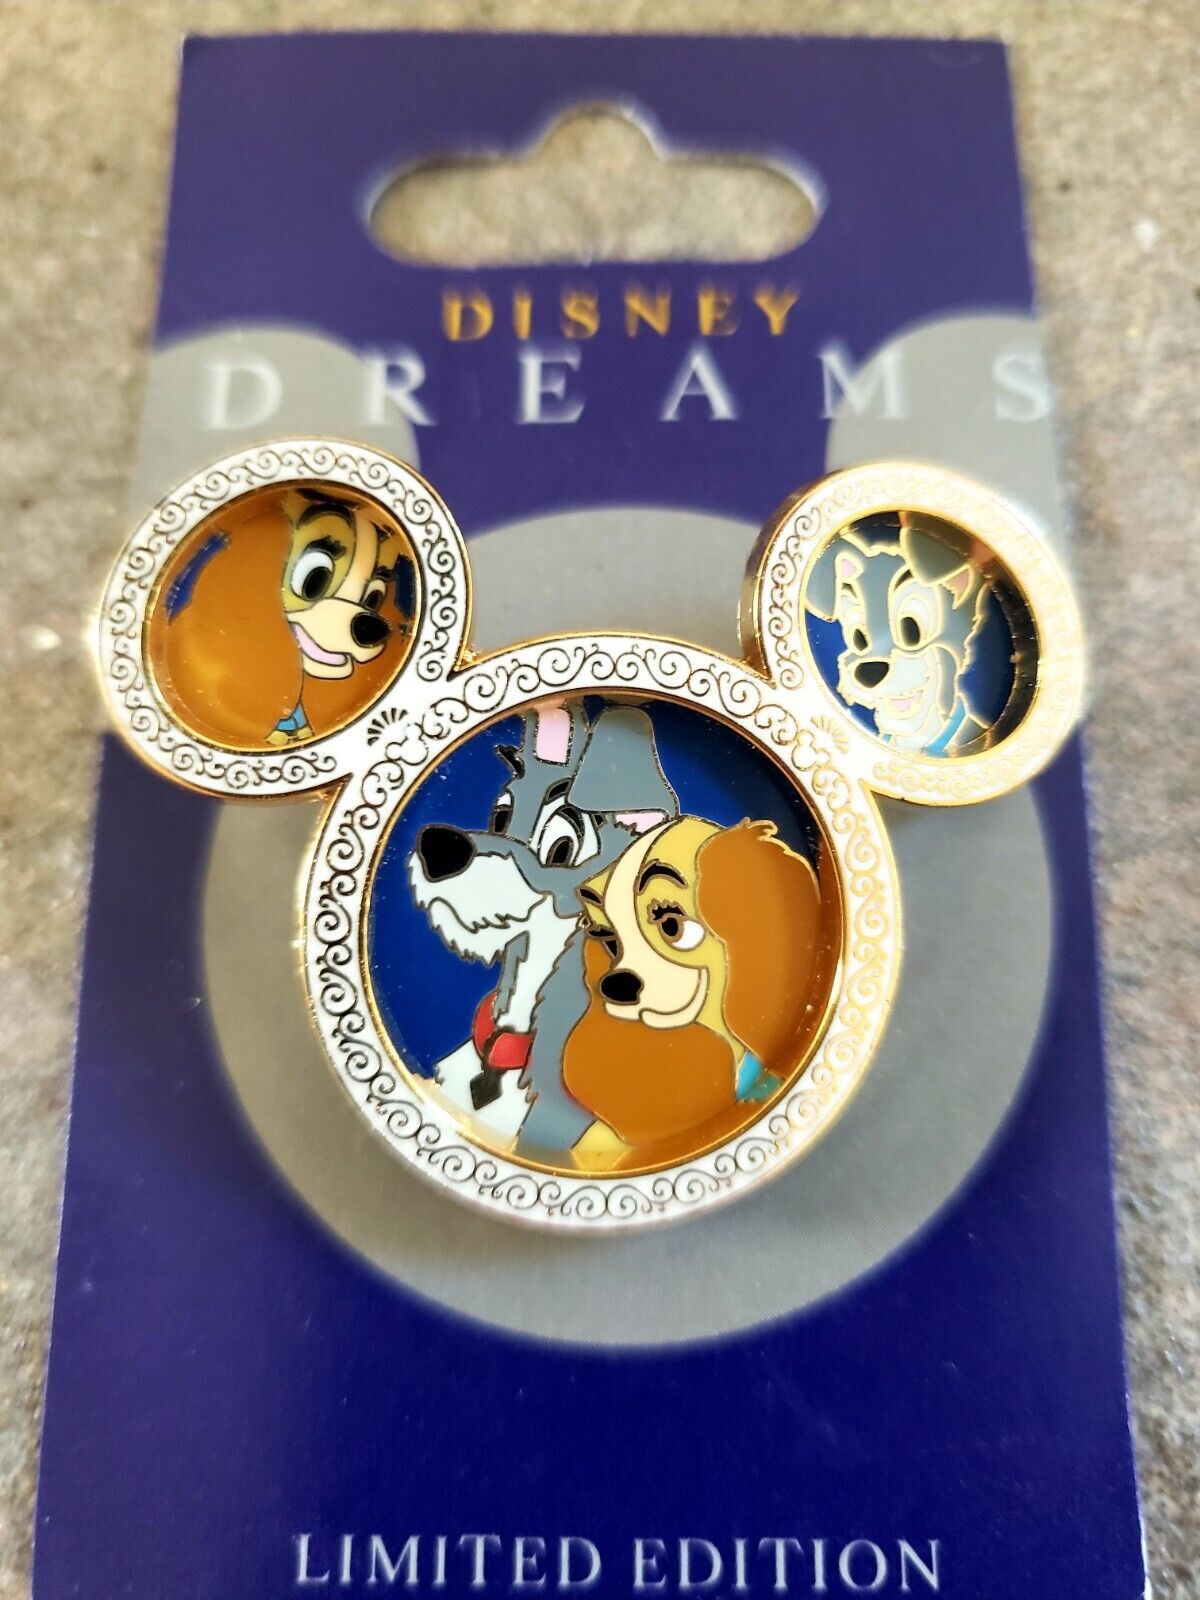 New On Card DLR Disney Dreams - Lady & the Tramp Mouse Head Shaped Pin, LE 1000